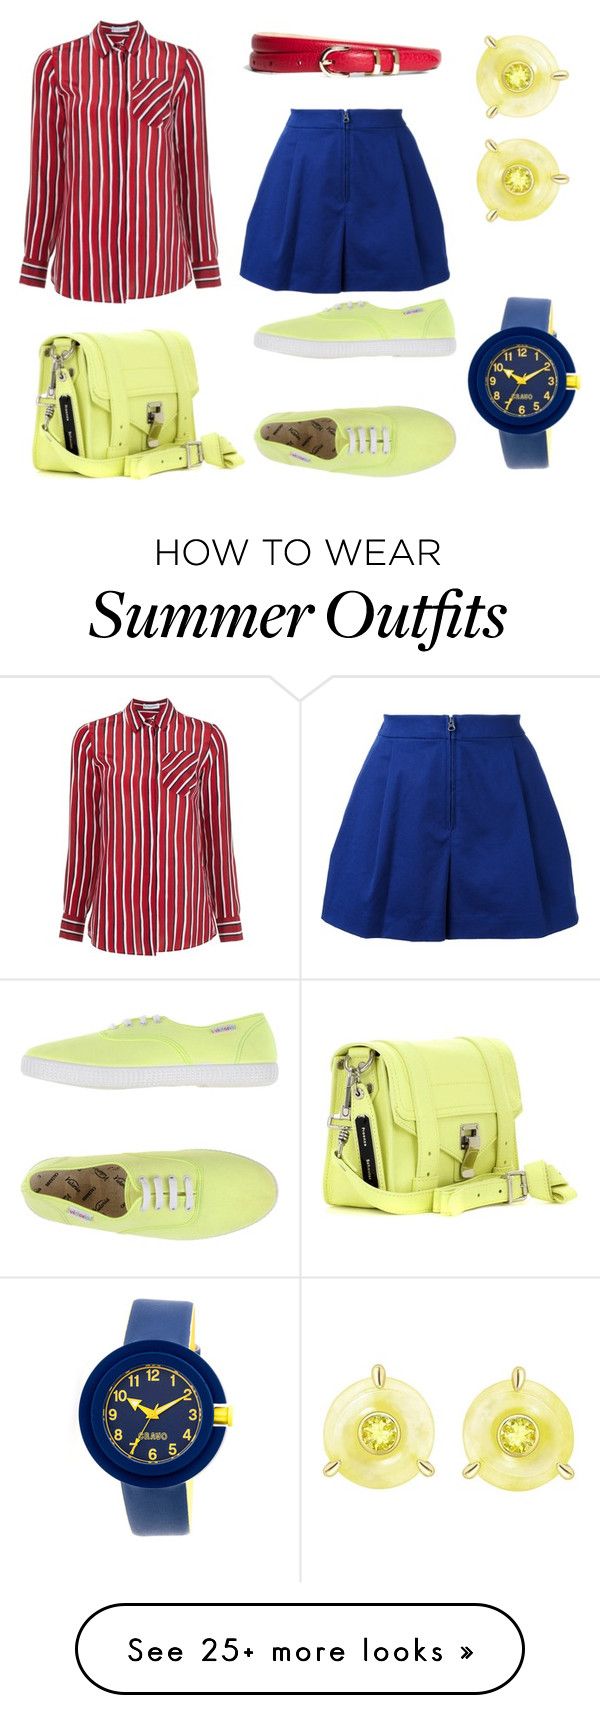 "026. Sport to Office outfit for Toned Summer color type" by sollis on...